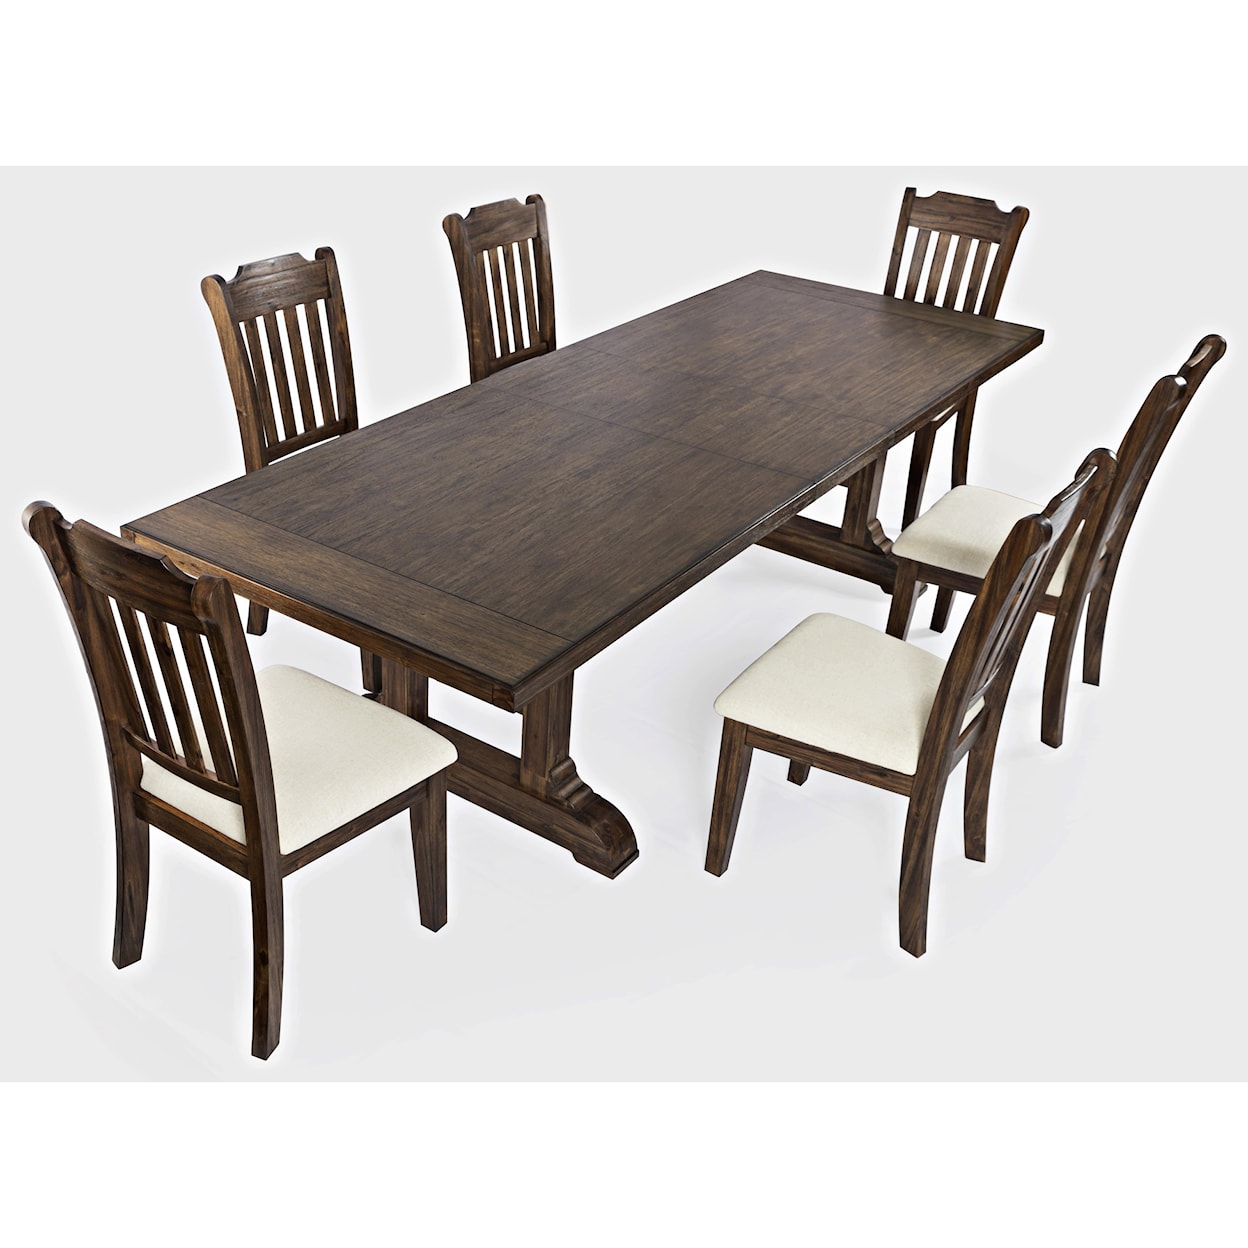 VFM Signature Bakersfield 7-Piece Dining Table and Chair Set